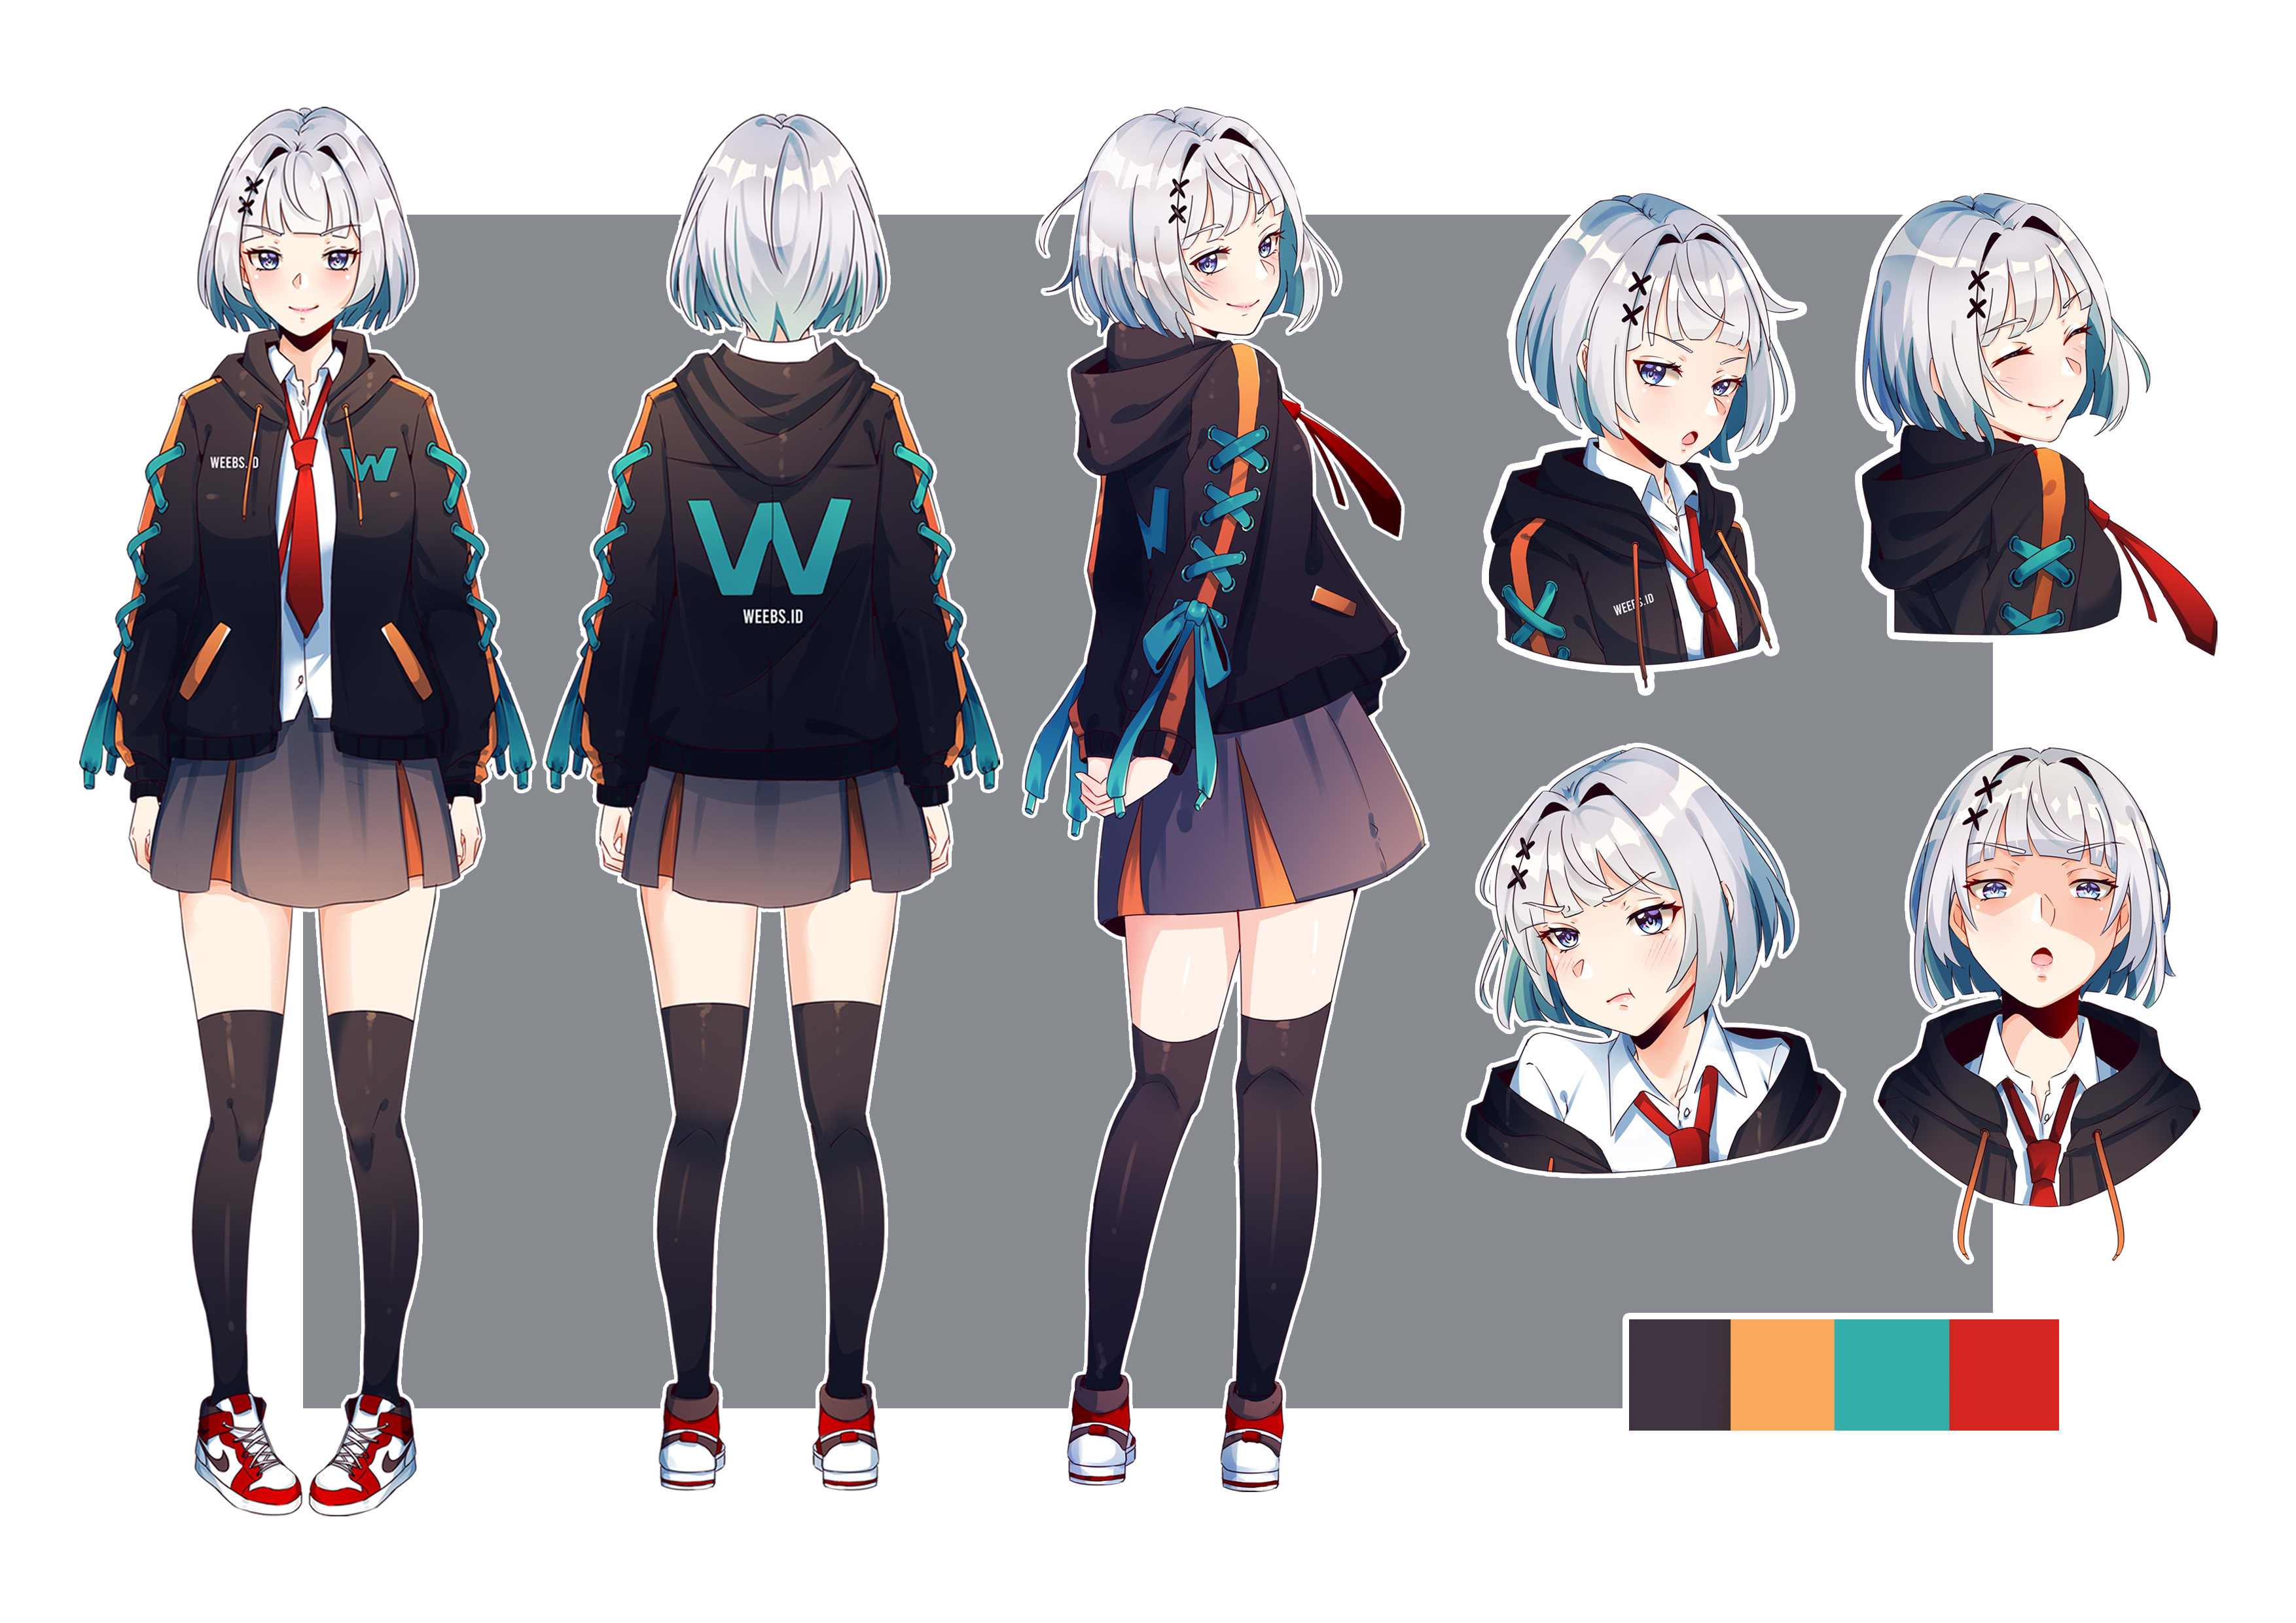 Draw anime character sheet of your oc professionaly by Wyrenmelon28 | Fiverr